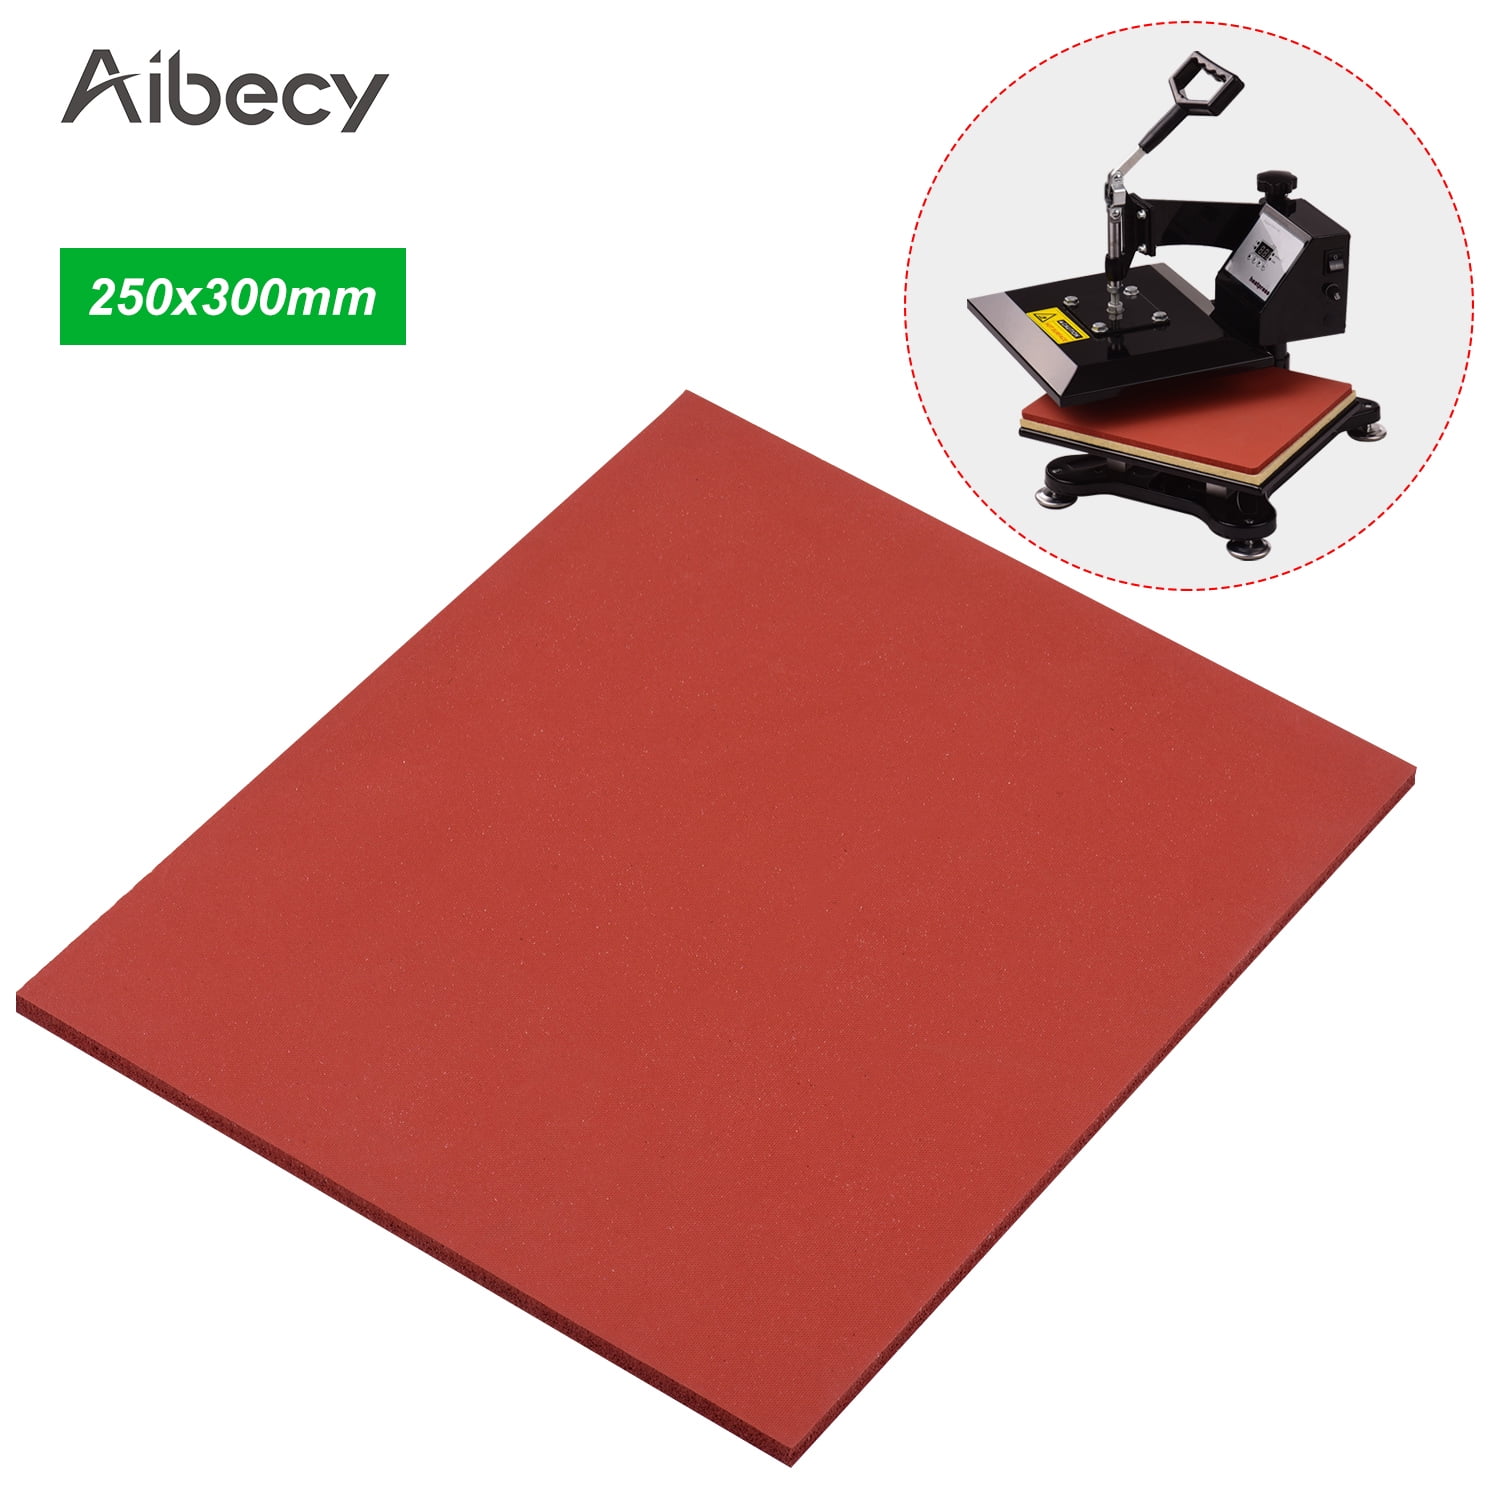 Easy Press Protective Resistant Mat Pad for Small Heat Press Machines